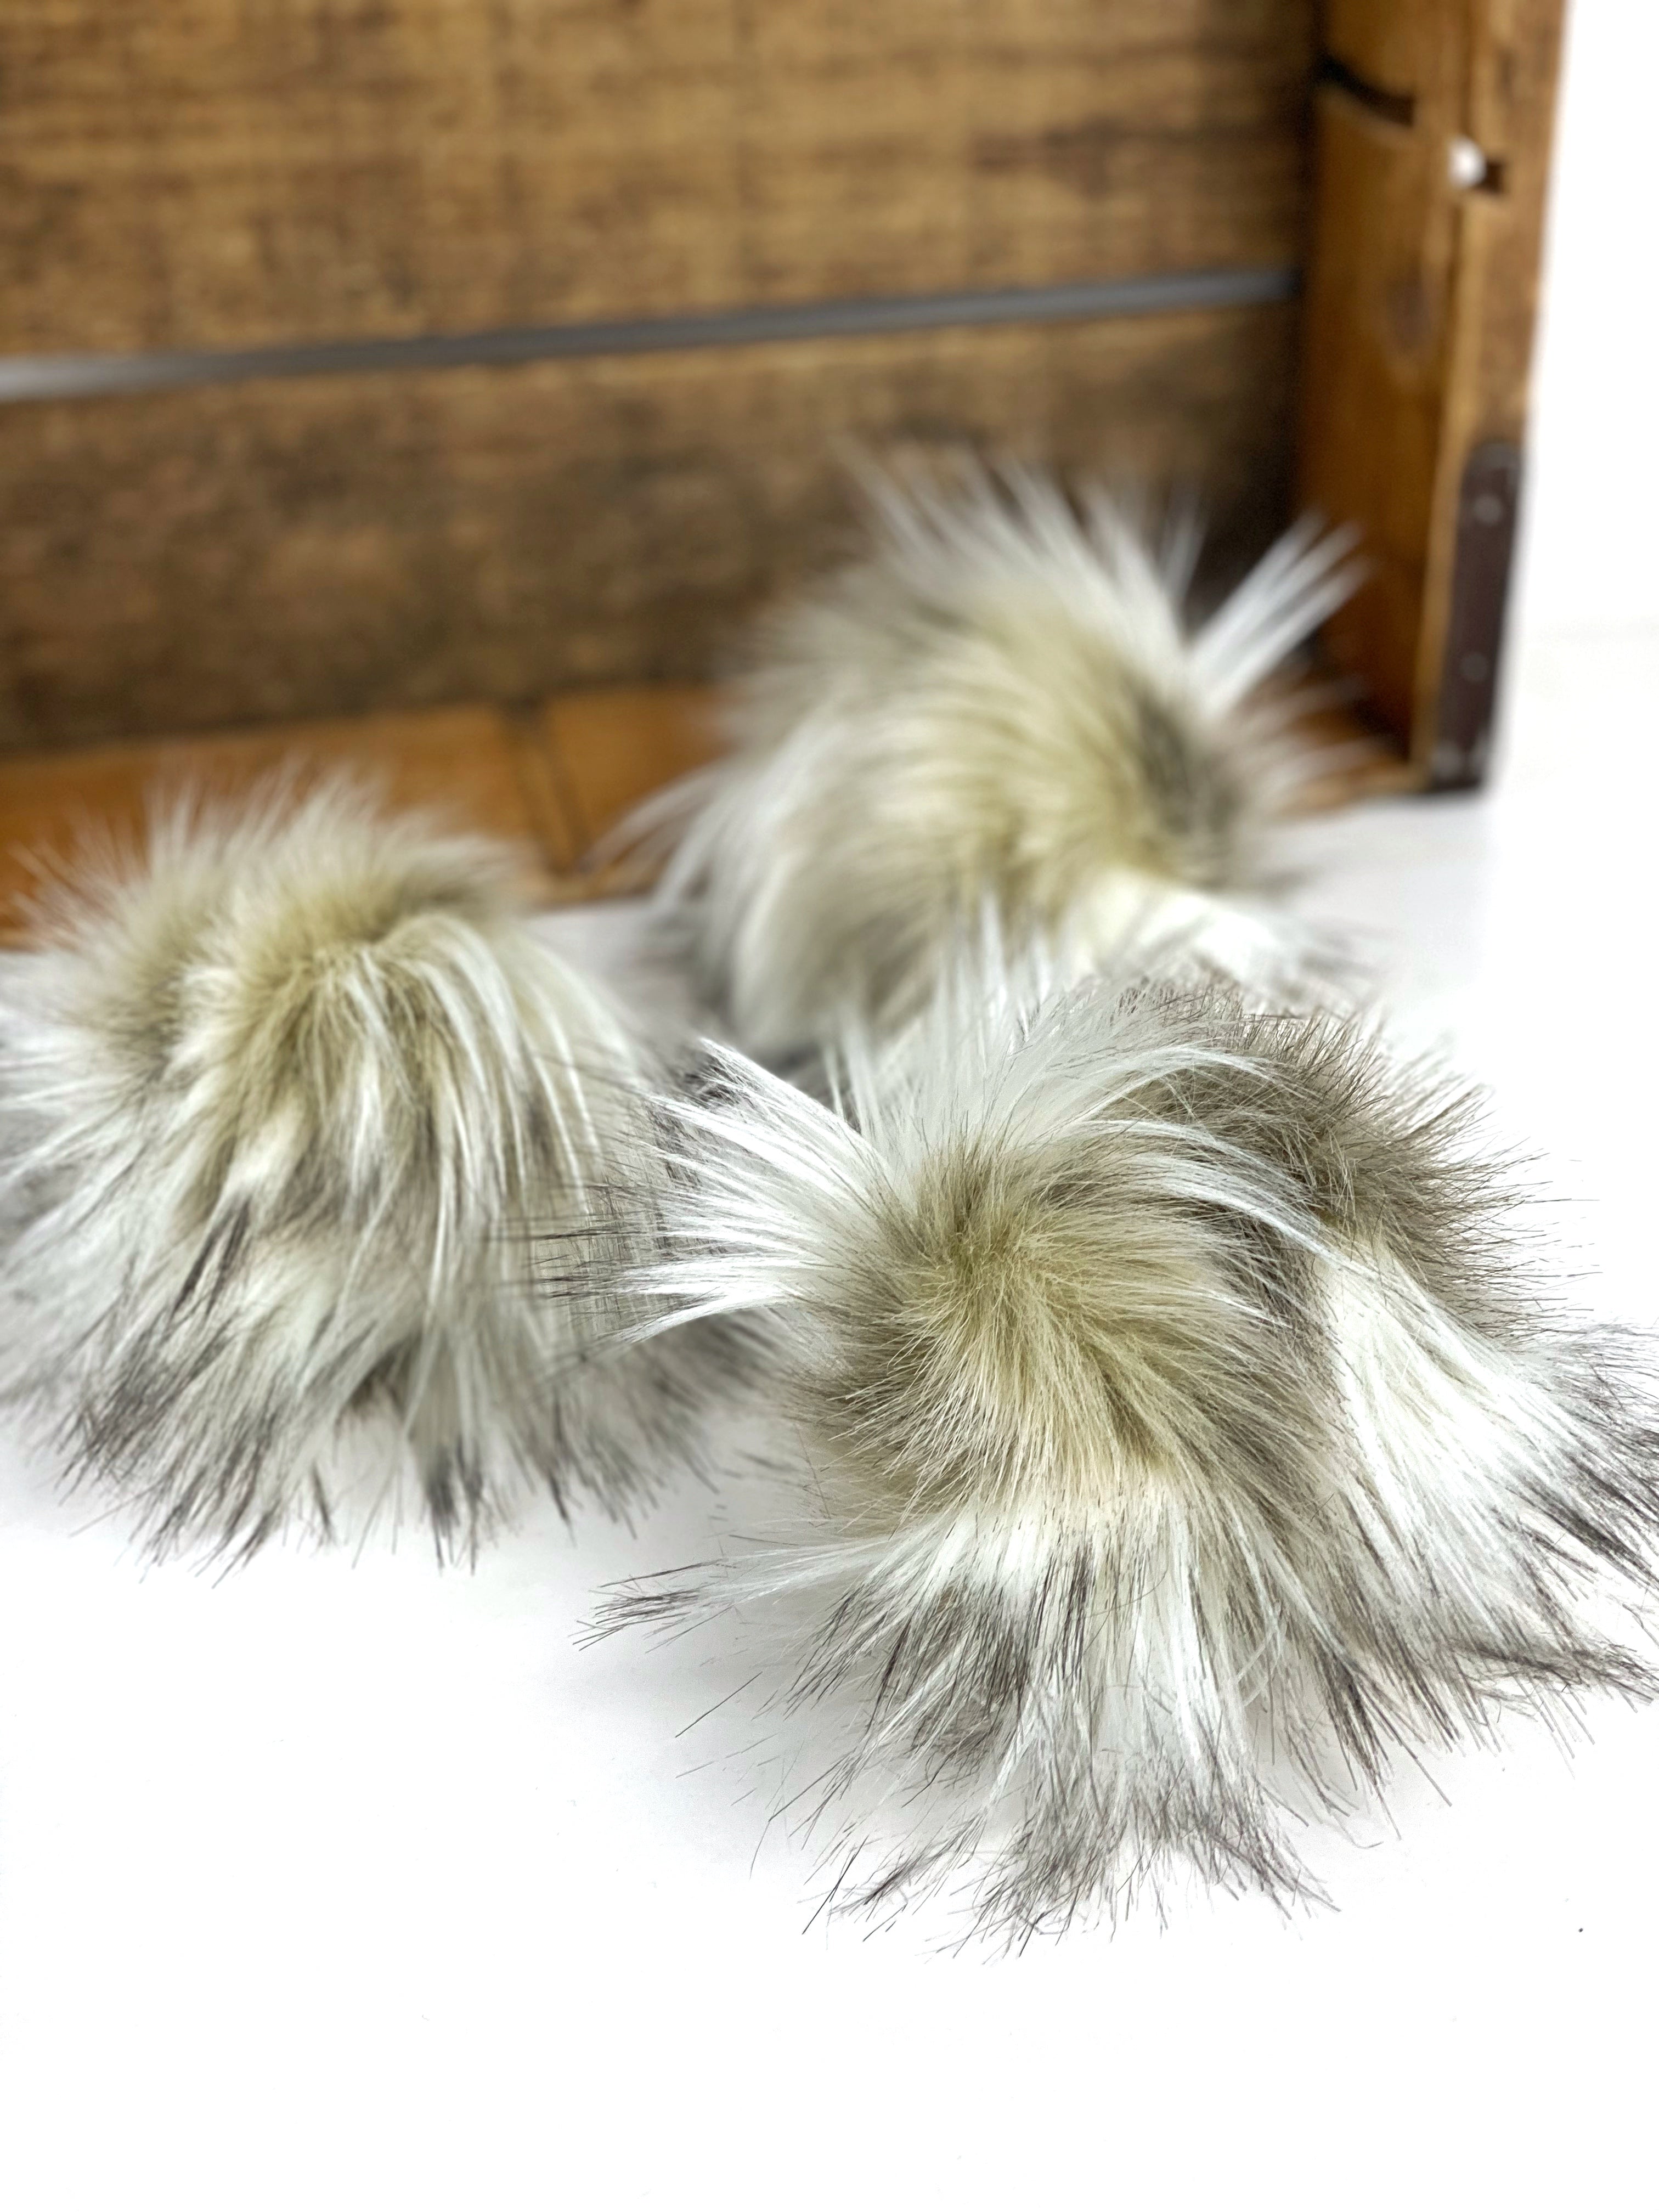 Faux Fur Pom Pom "Tundra" for Knit and Crochet Hats Beanies Toques Handmade by Kitchen Klutter